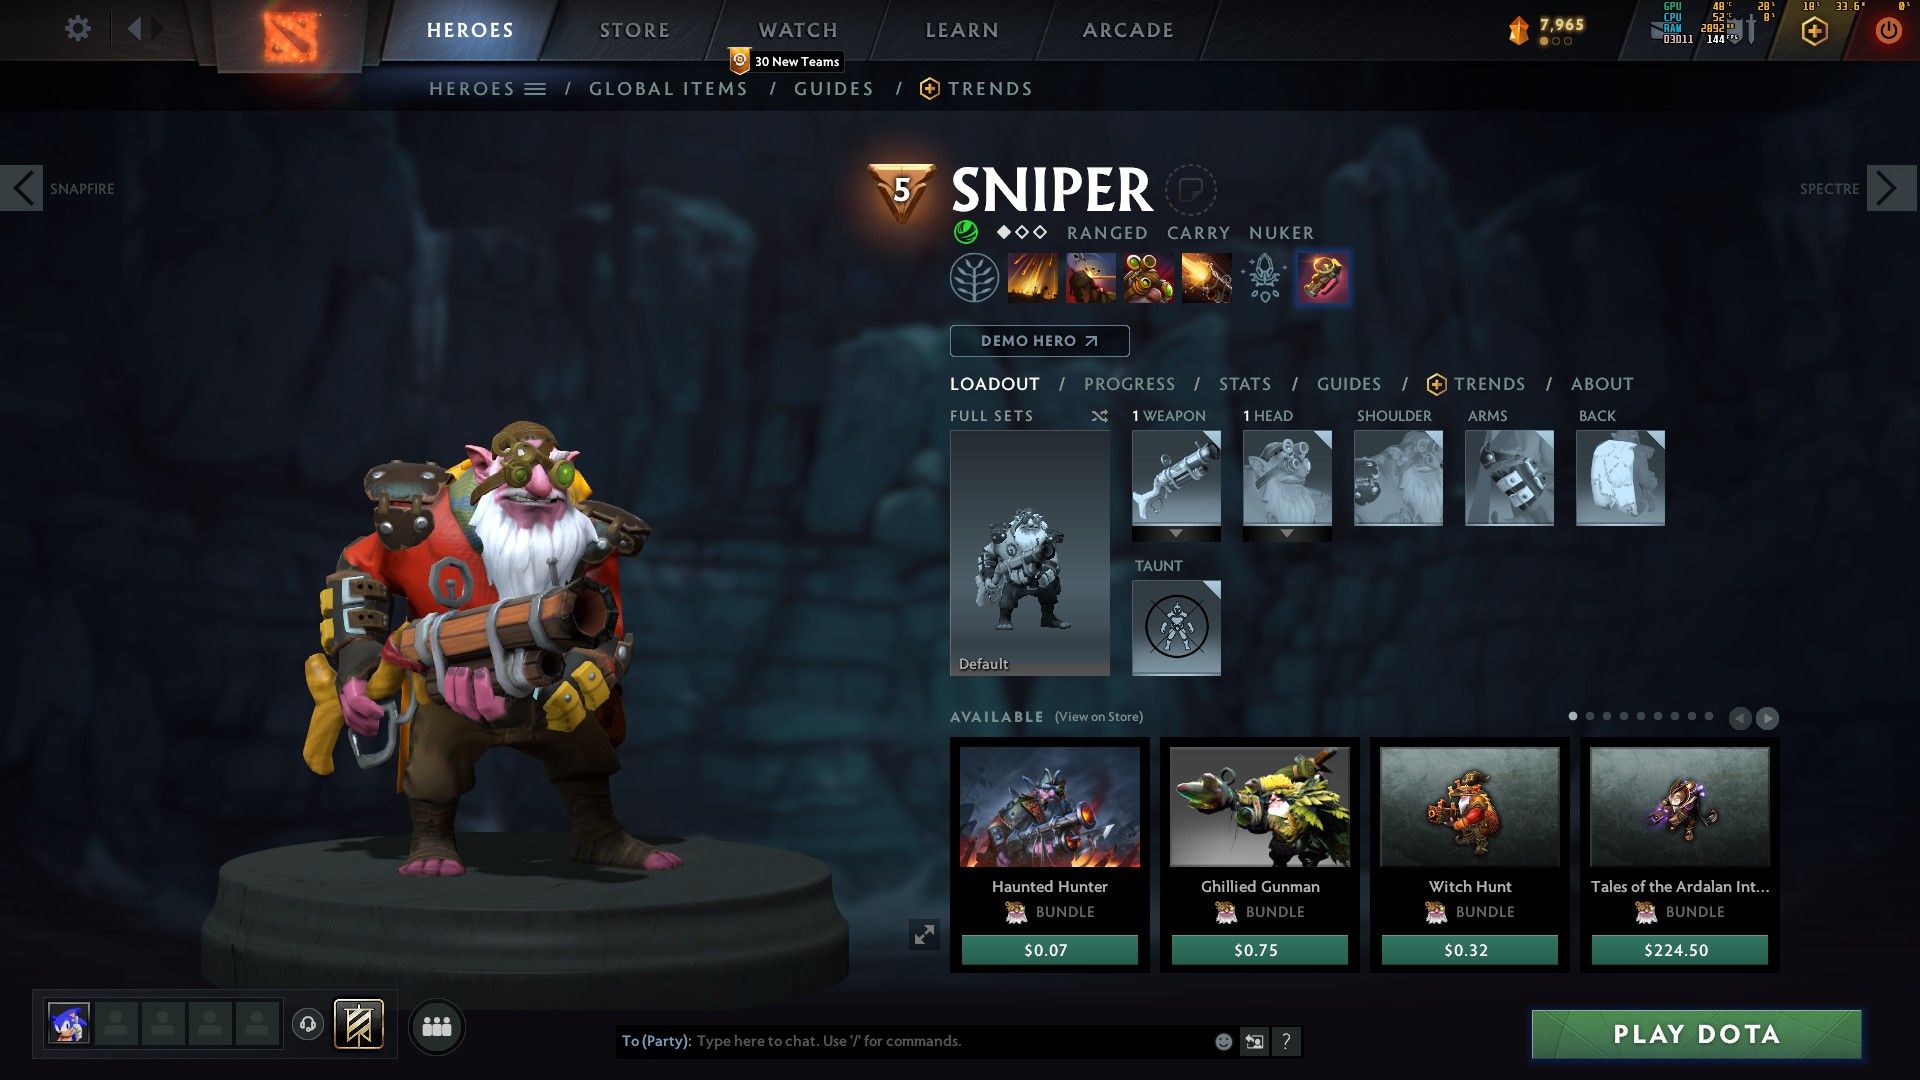 Sniper Preview